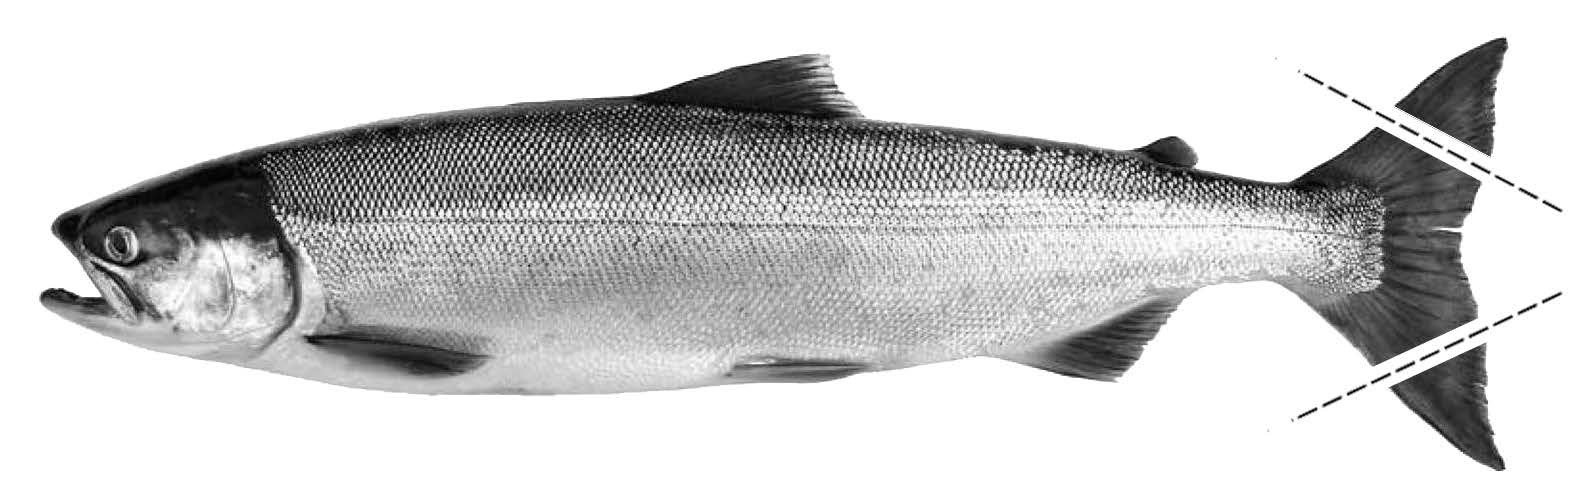 Fish diagram showing clipped tail